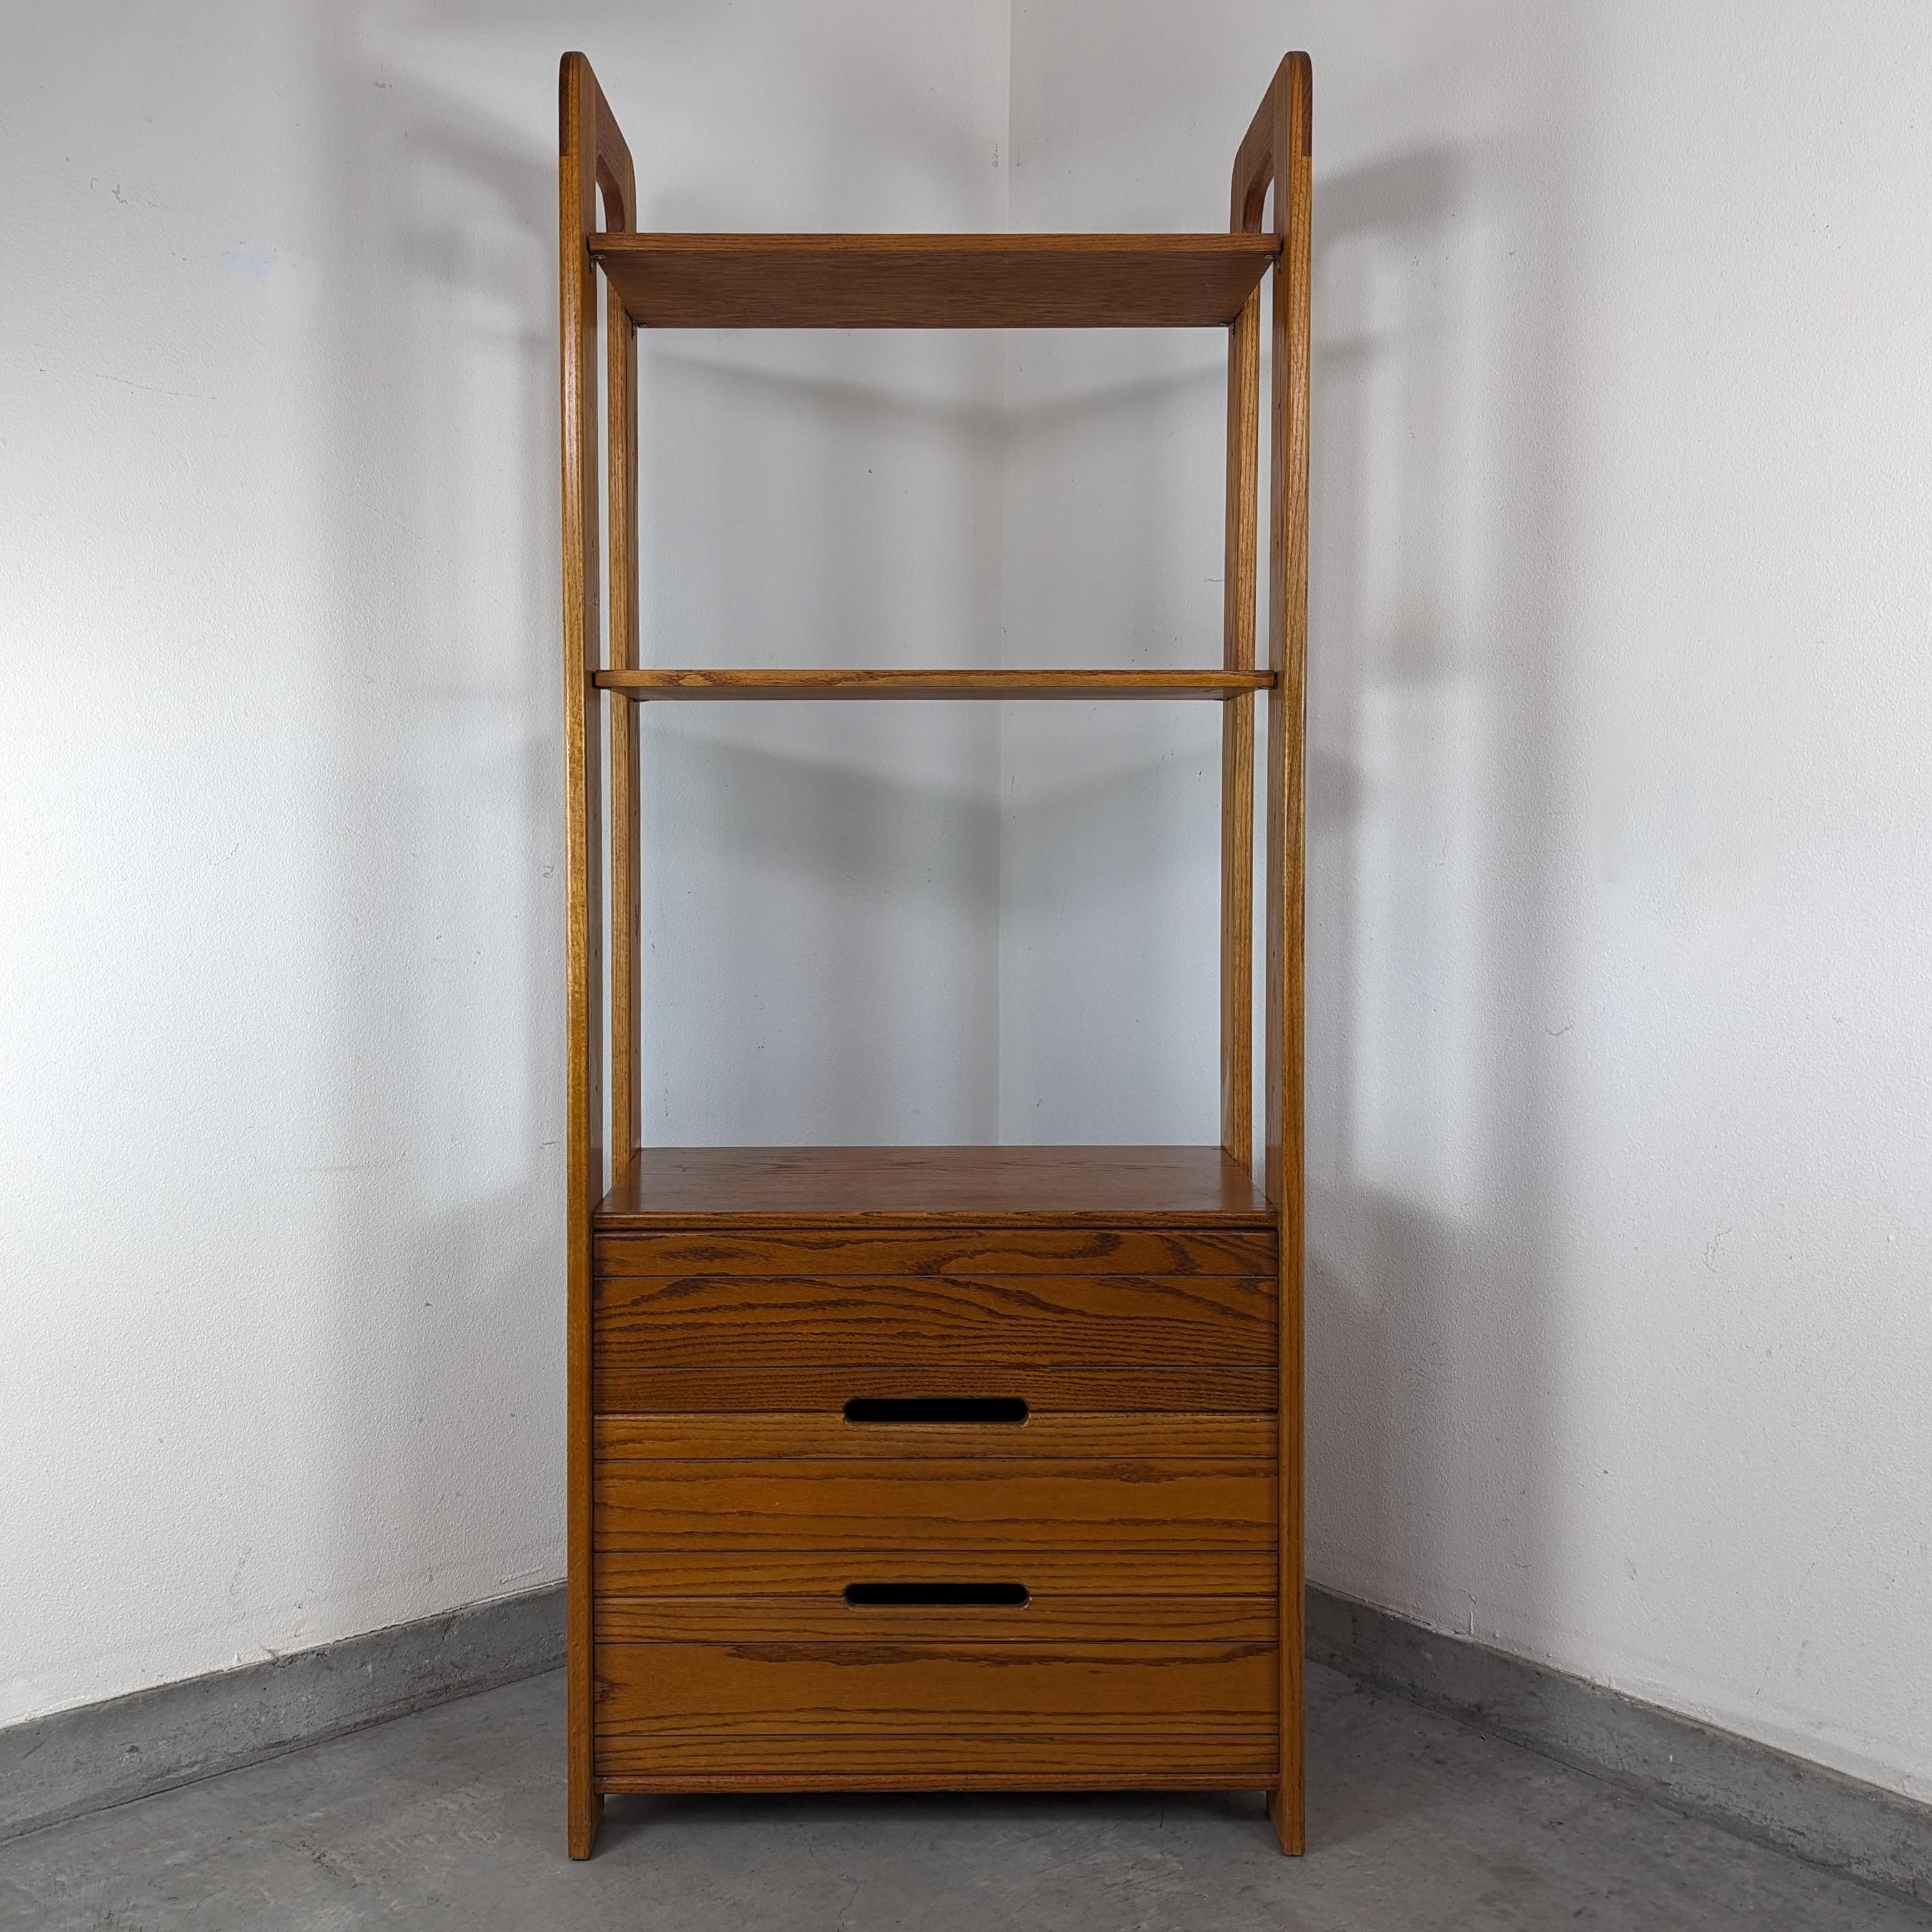 Embrace the timeless elegance and functional design of the mid-century era with this exquisite Freestanding Wall Unit Shelving, masterfully designed by Lou Hodges for the renowned California Design Group in the 1970s. This authentic piece showcases